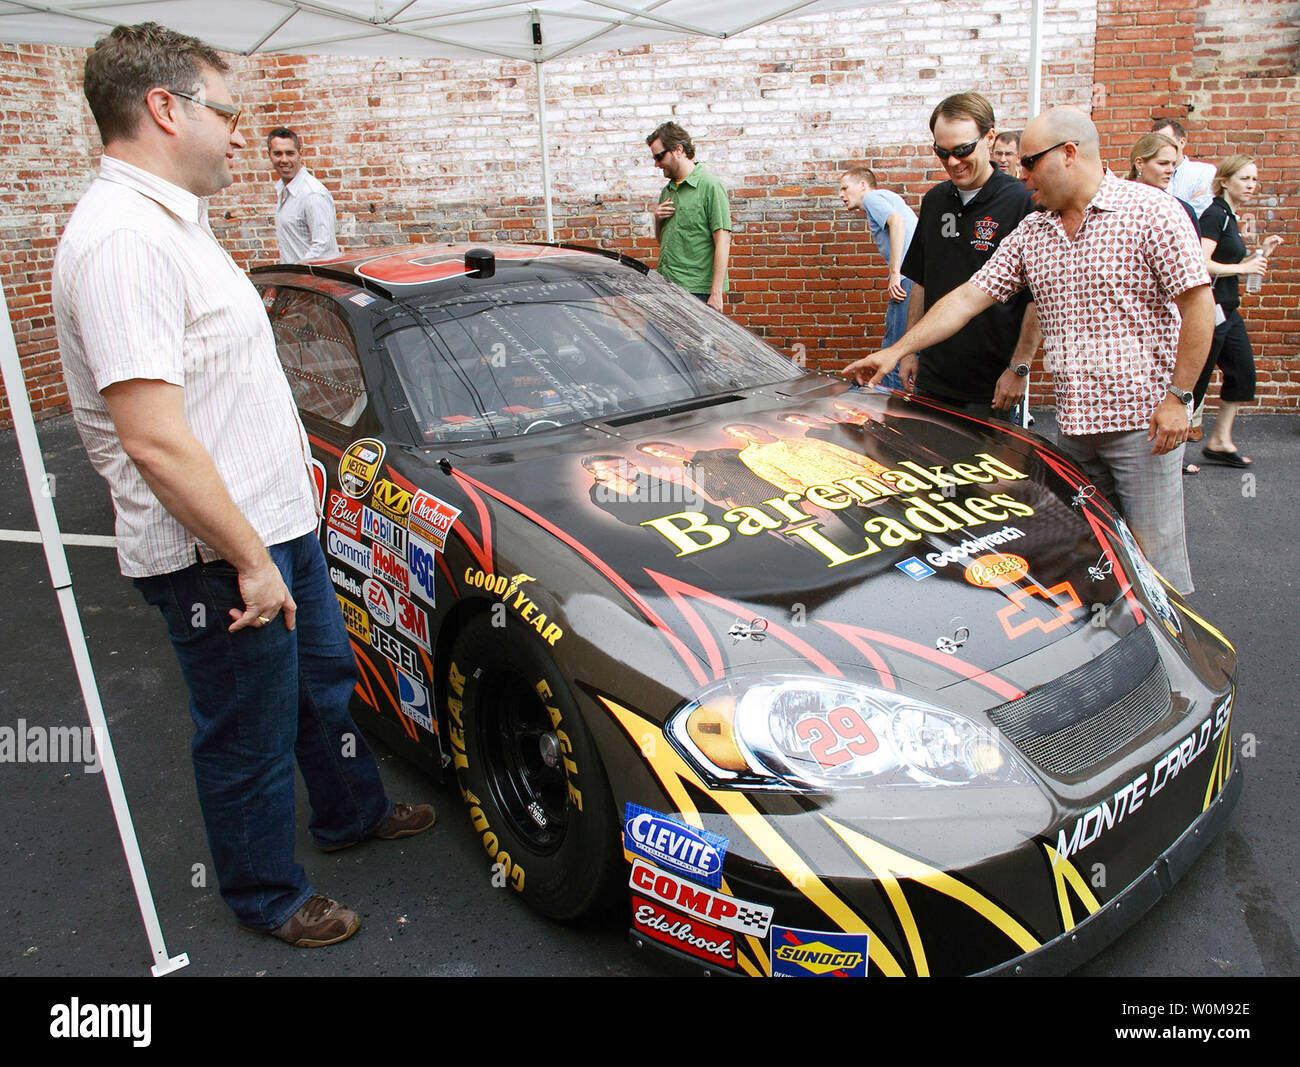 Members of the band Barenaked Ladies meet with NASCAR driver Kevin Harvick (center) to get a good look at the #29 GM Goodwrench Chevy Monte Carlo SS racecar with images of the Barenaked Ladies band on the hood at XM Satellite Radio headquarters in Washington, DC on July 13, 2006. Chevrolet announced the Barenaked Ladies will perform the pre-race concert at the Chevy Rock & Roll 400. The race, that takes place September 9 at Richmond International Raceway, will feature Harvick in the Barenaked Ladies racecar. (UPI Photo/Tyler Mallory/General Motors) Stock Photo